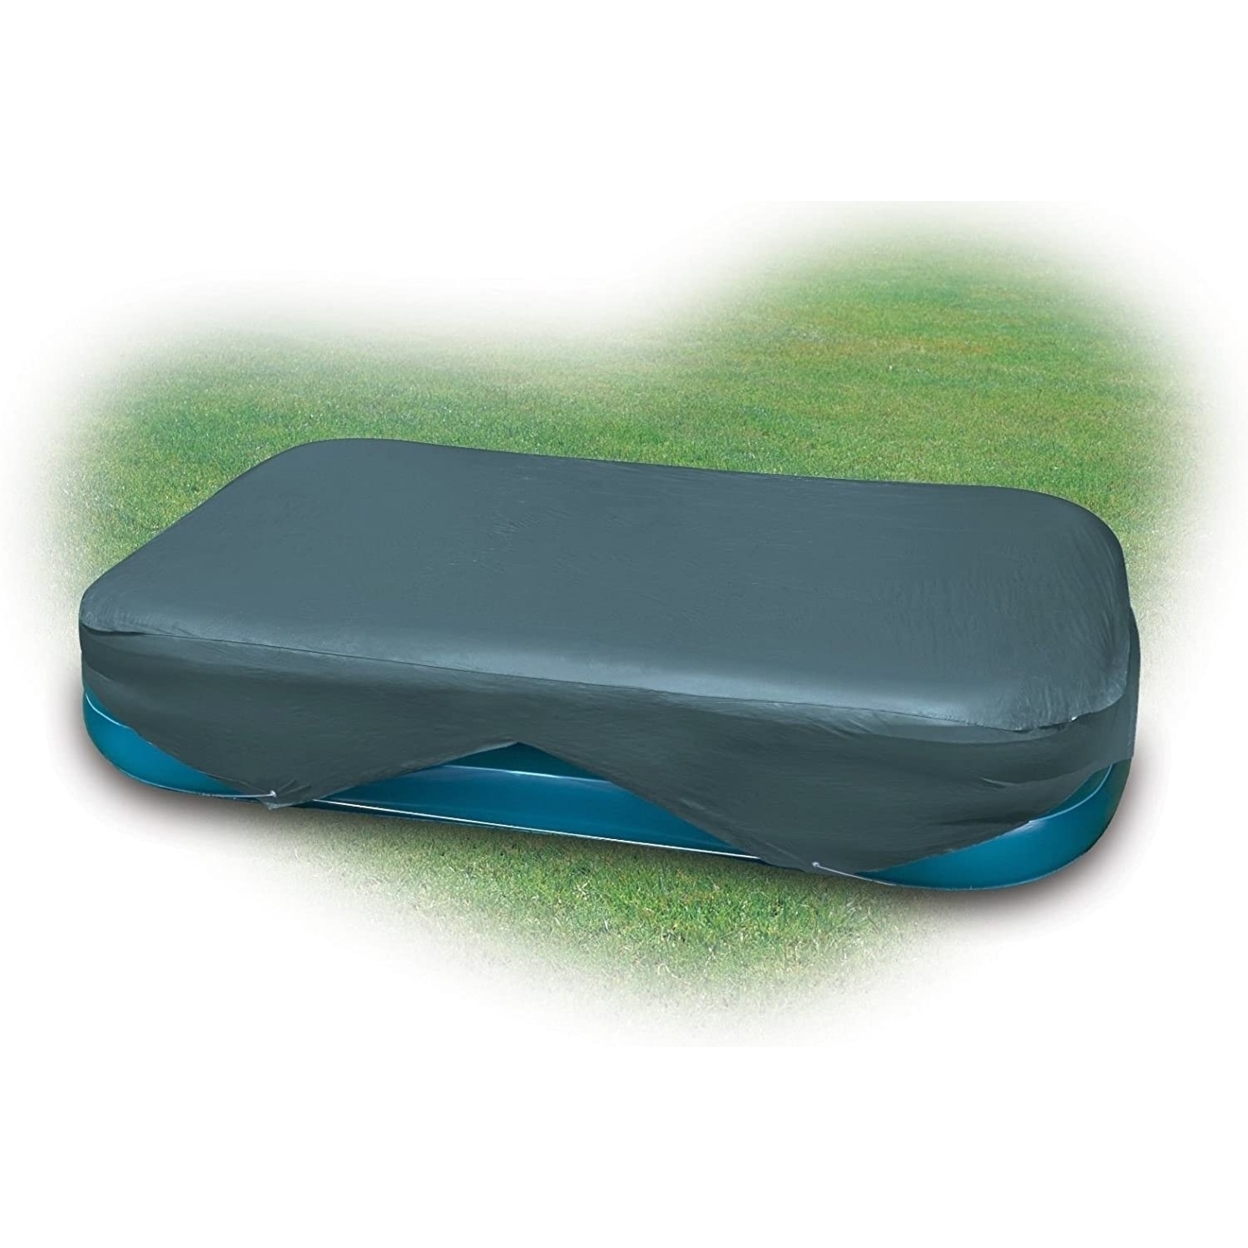 Intex Rectangular Pool Cover For 103 In X 69 In- 120 In X 72 In Pools